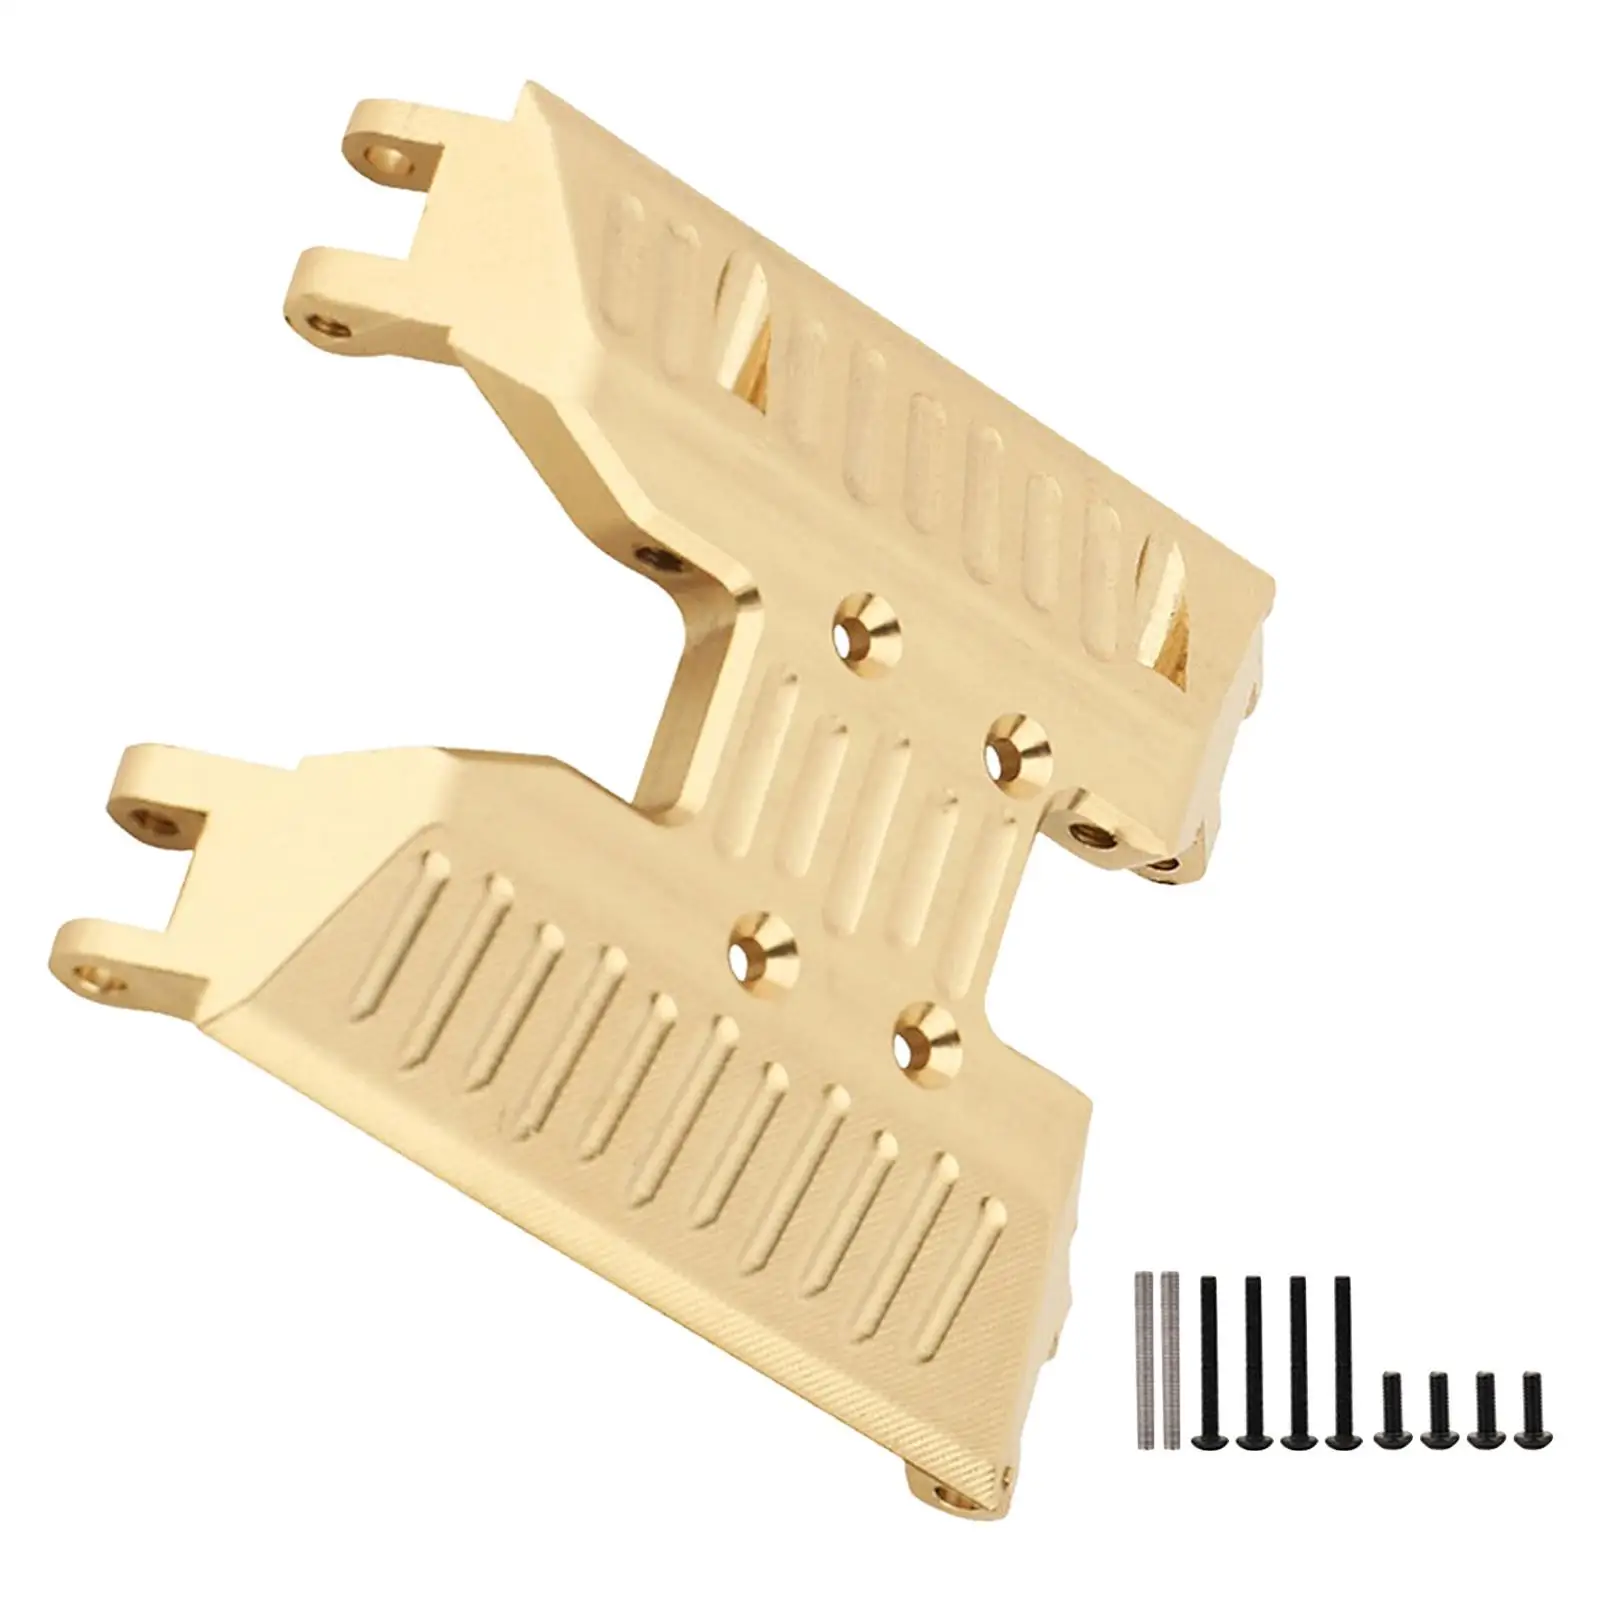 Brass Skid Plate Upgrade Parts Accessories Frame Protector Chassis Guard Board Gearbox Mount Holder for 1/18 RC Crawler Car